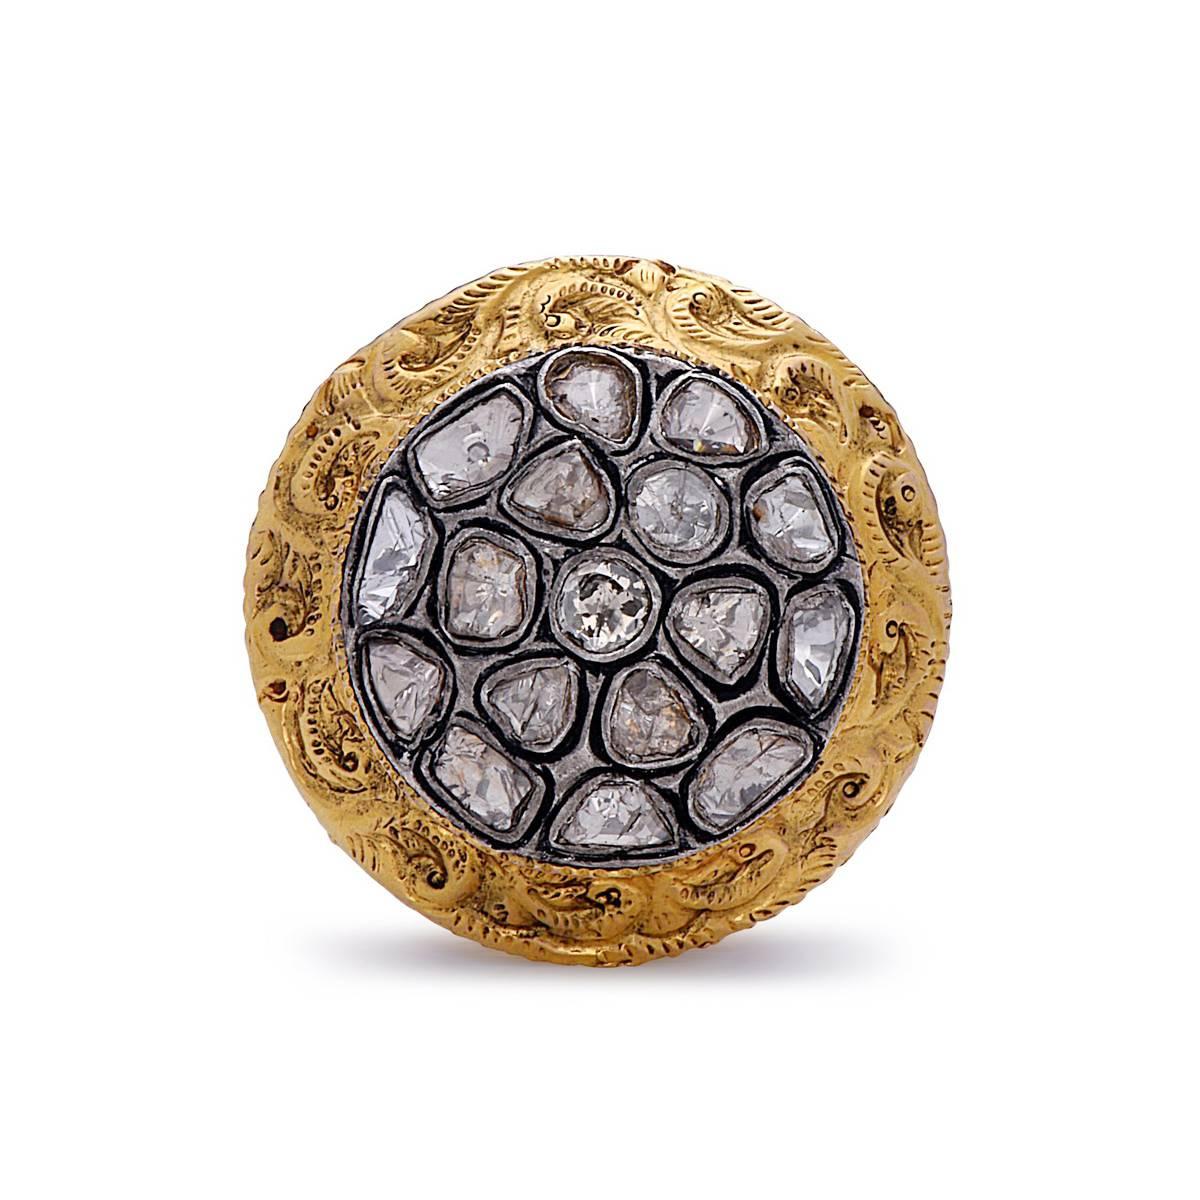 Feel like a queen when you wear this 14K yellow gold handcarved Rosecut Diamond Ring. This round cocktail ring is handcarved with beautiful petal design around the diamond cluster band and on the back side. 

Ring Size: 6.75 (can be sized)
14K